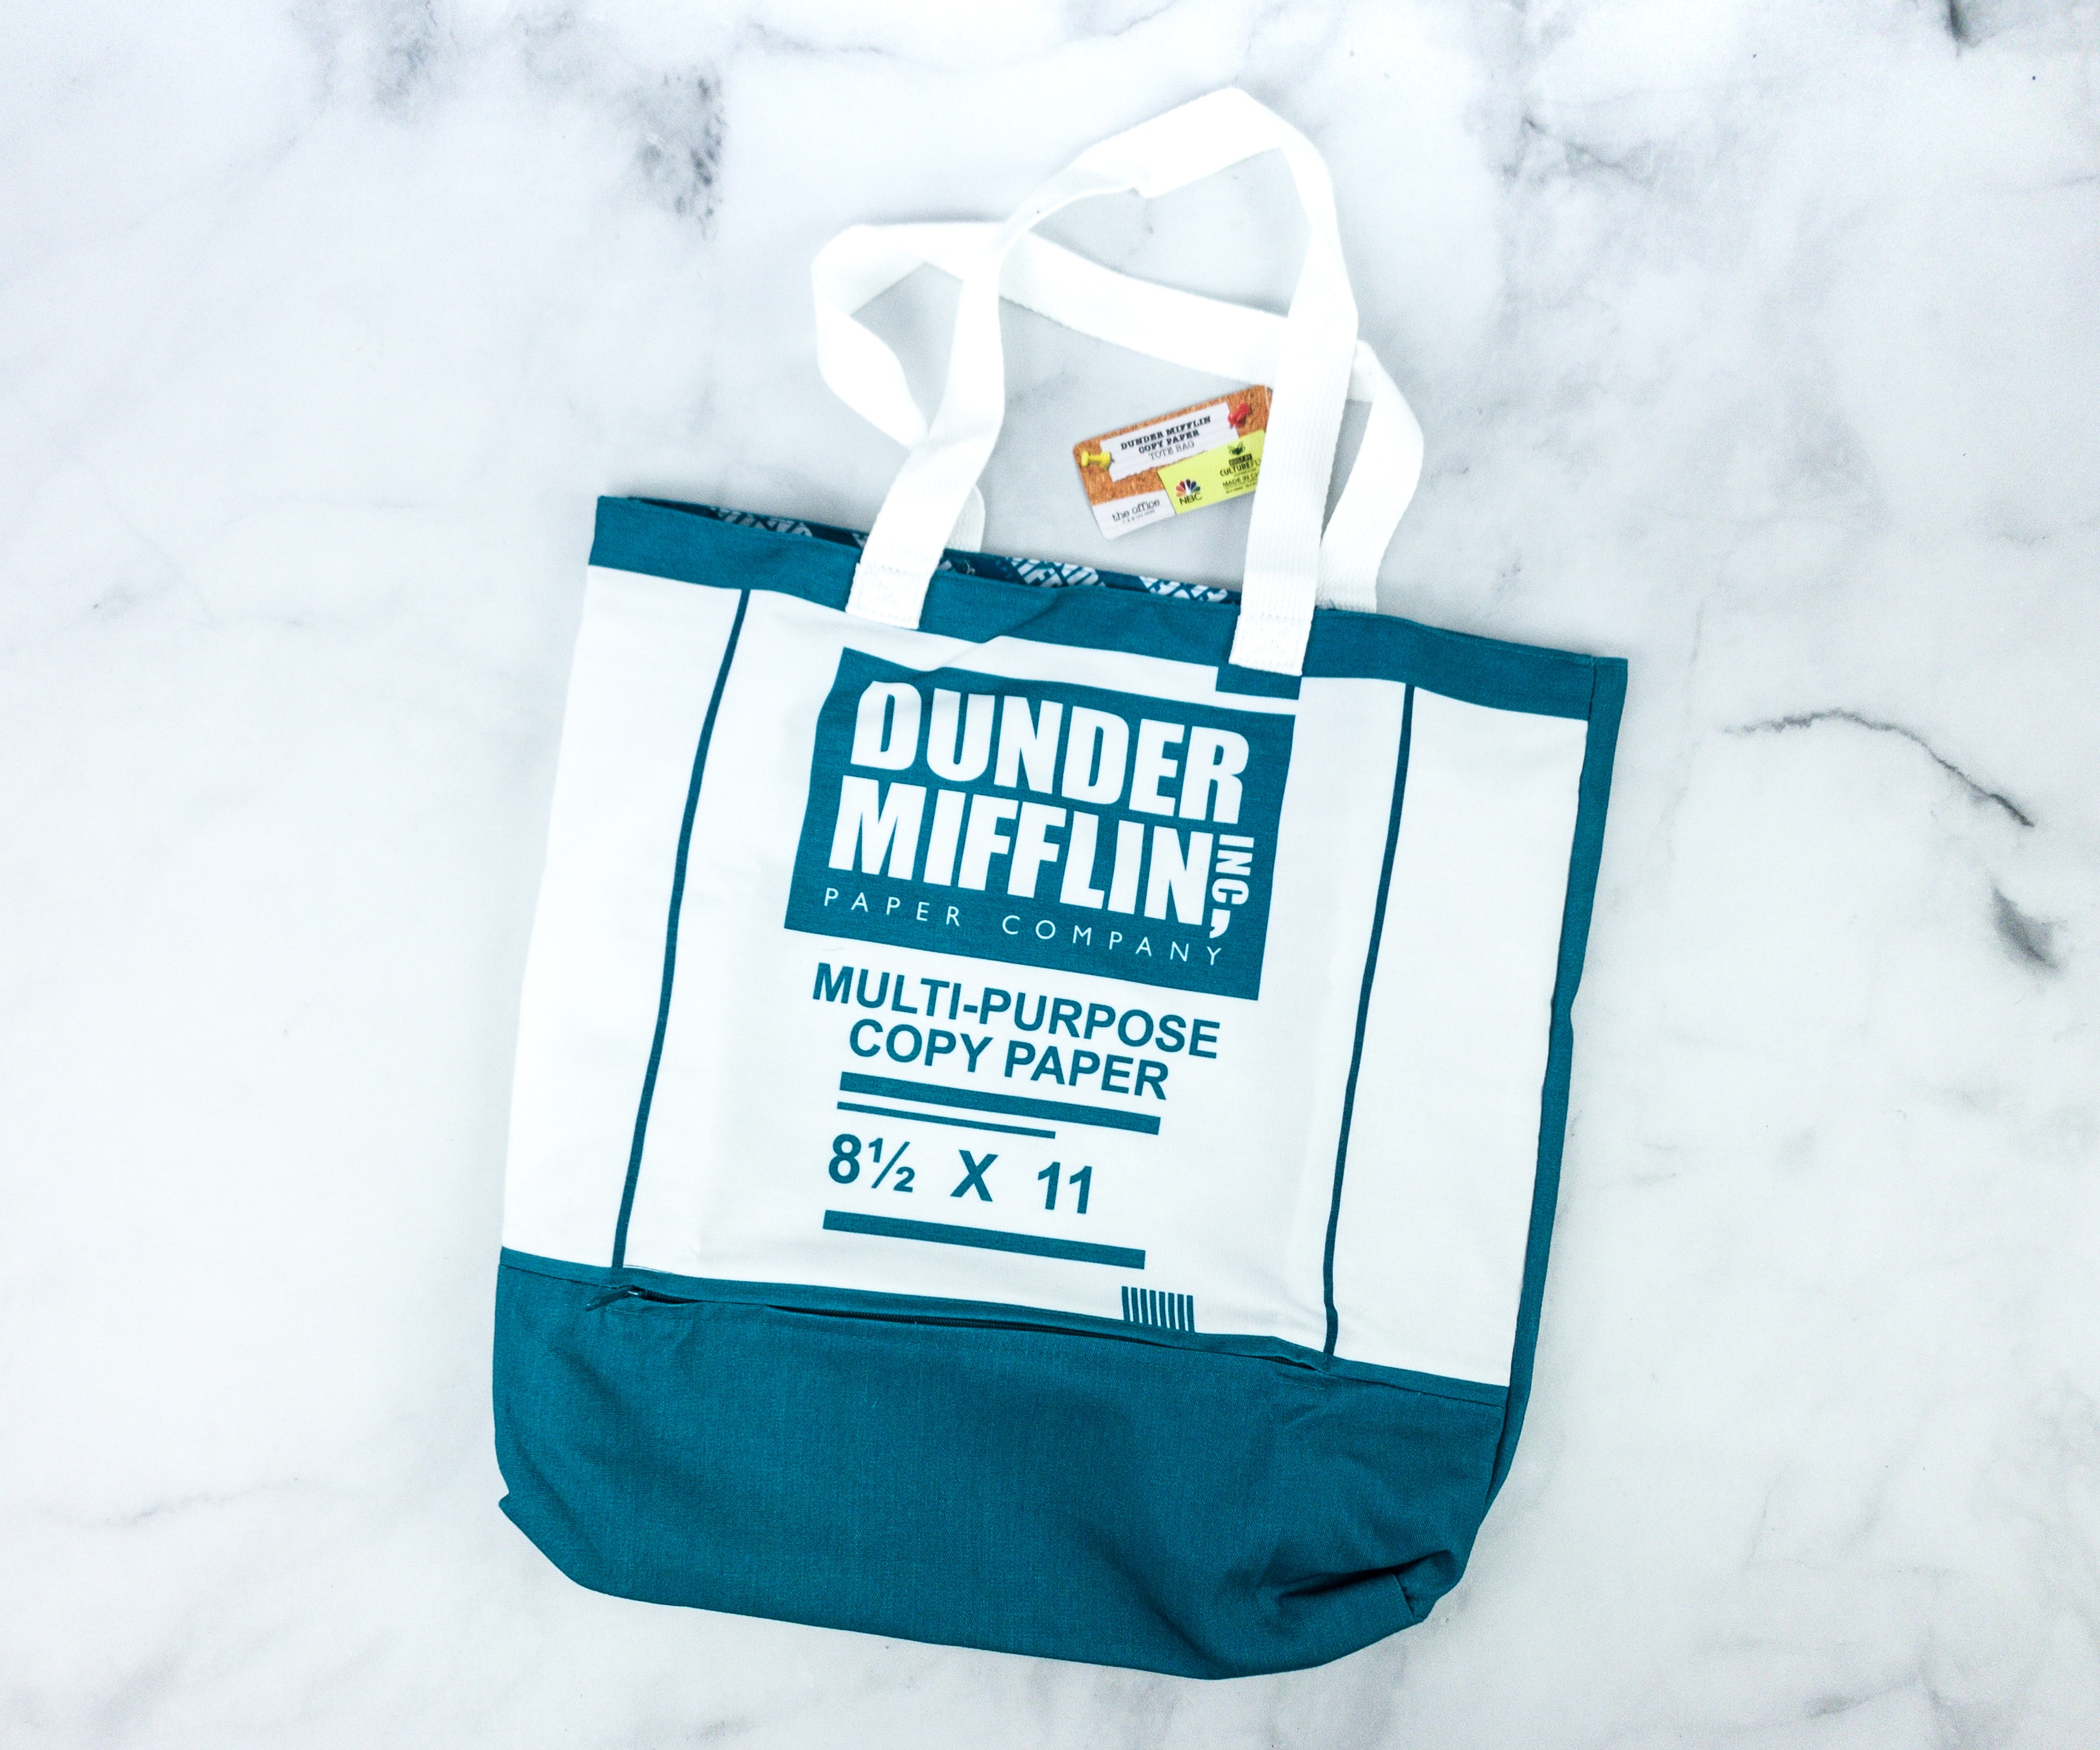 The Office Cute Stanley Pretzel Day Tote Bag